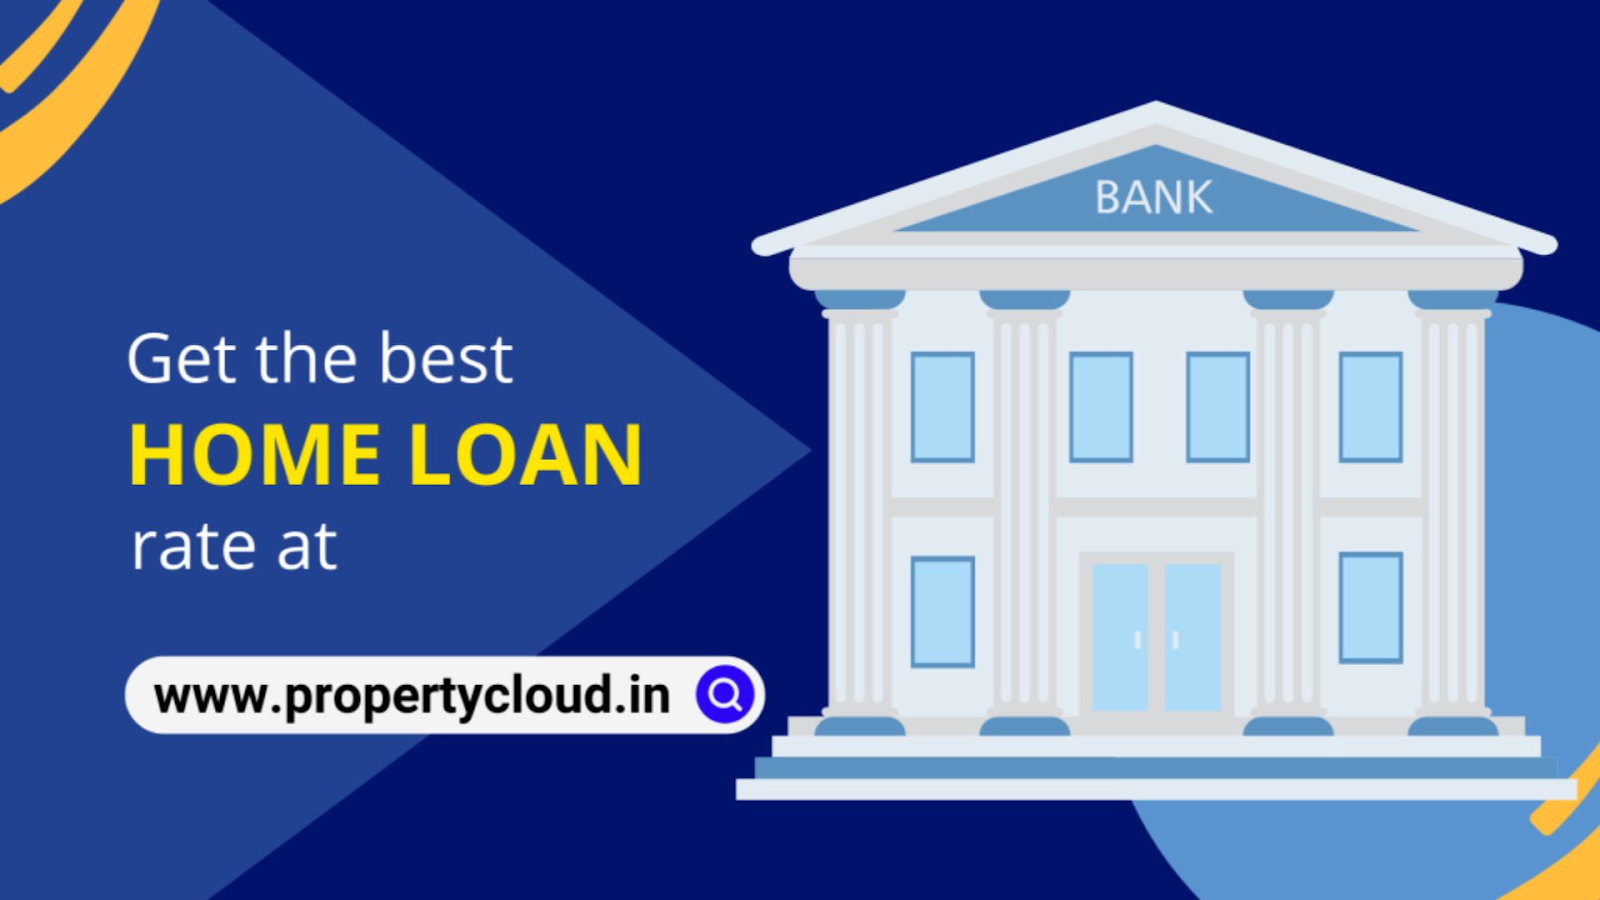 Get the best home loan rate at PropertyCloud.